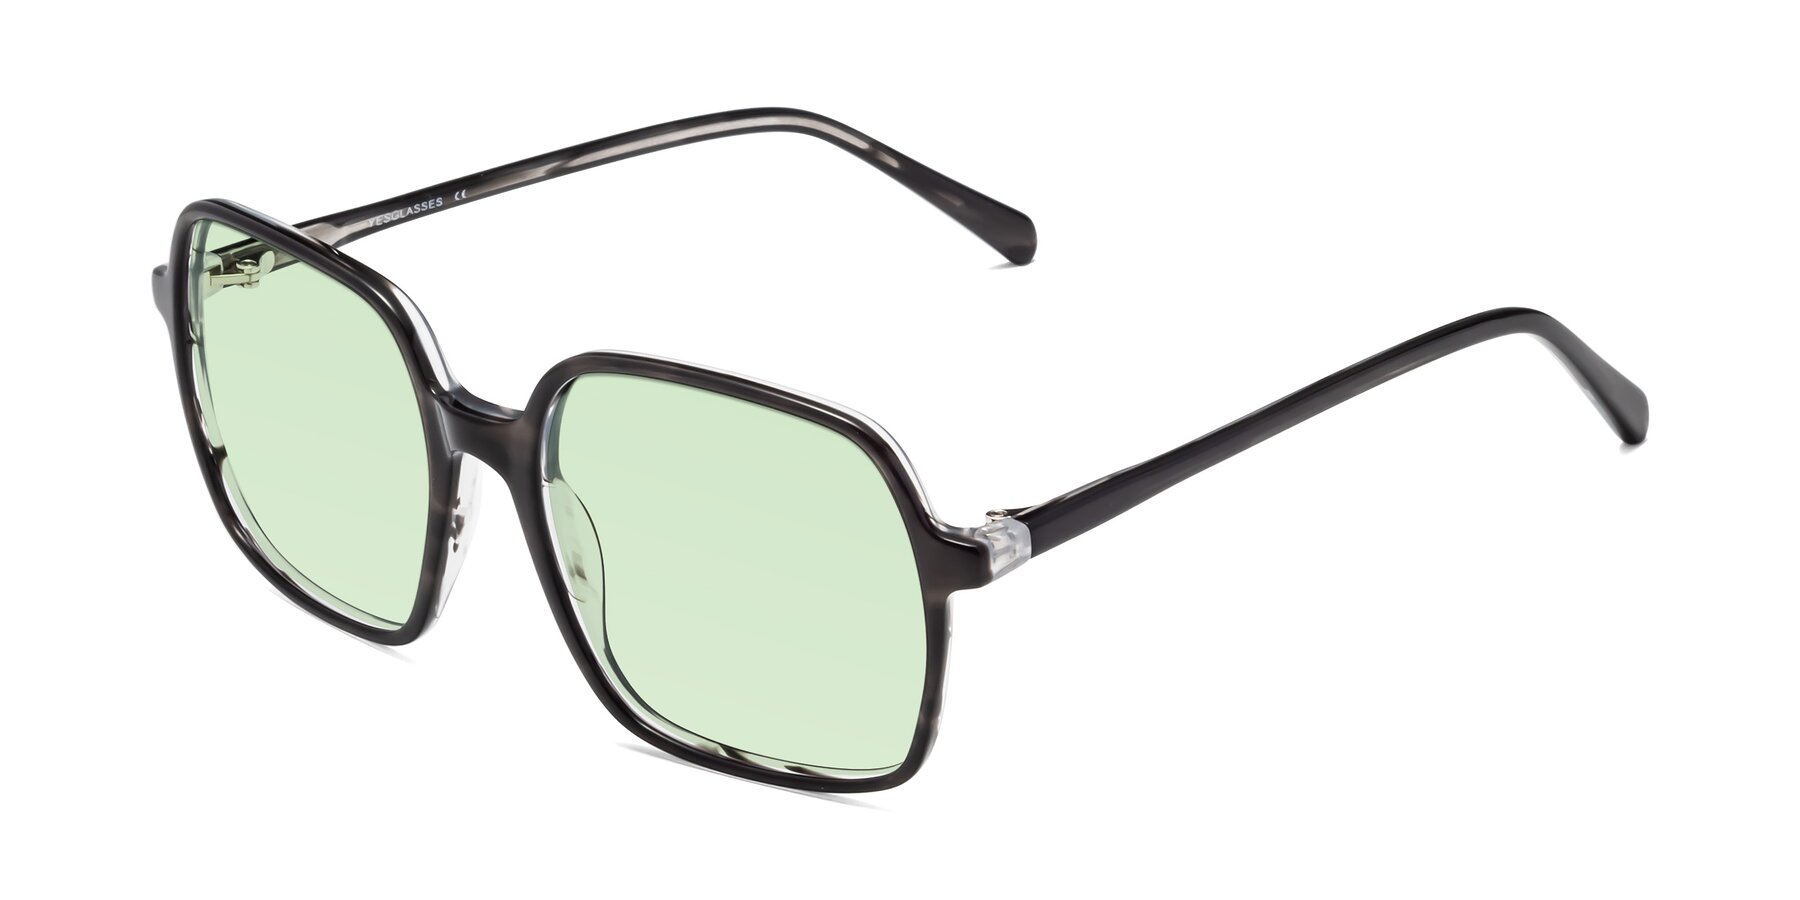 Angle of 1463 in Gray with Light Green Tinted Lenses